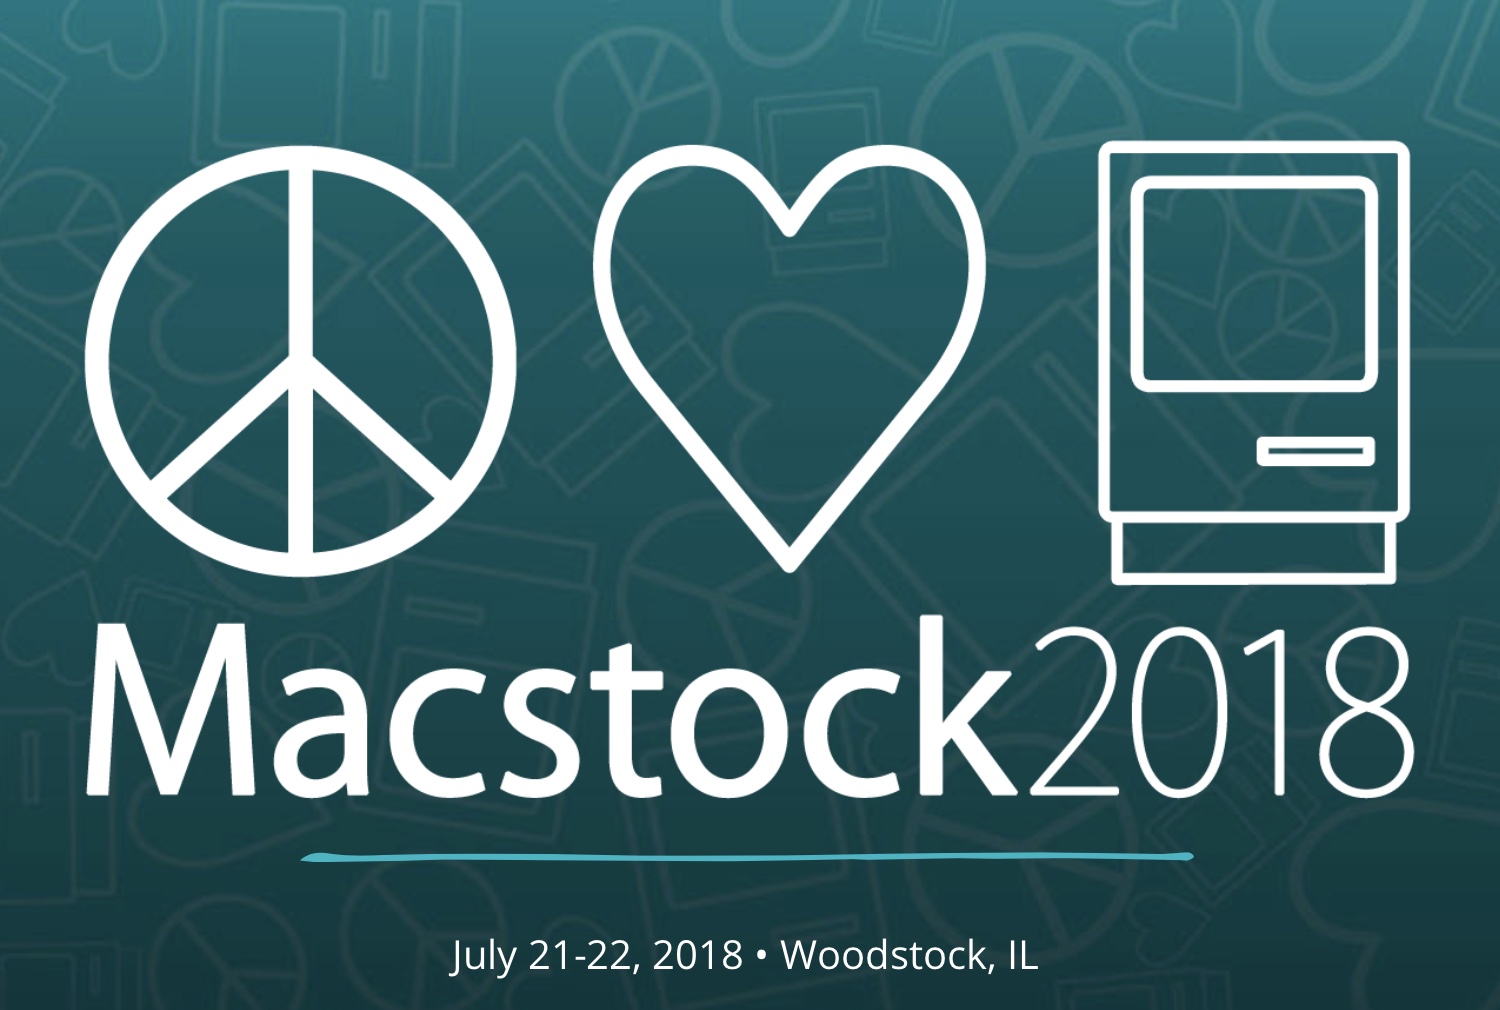 Tropical Software contributes copies of TopXNotes to Macstock attendees